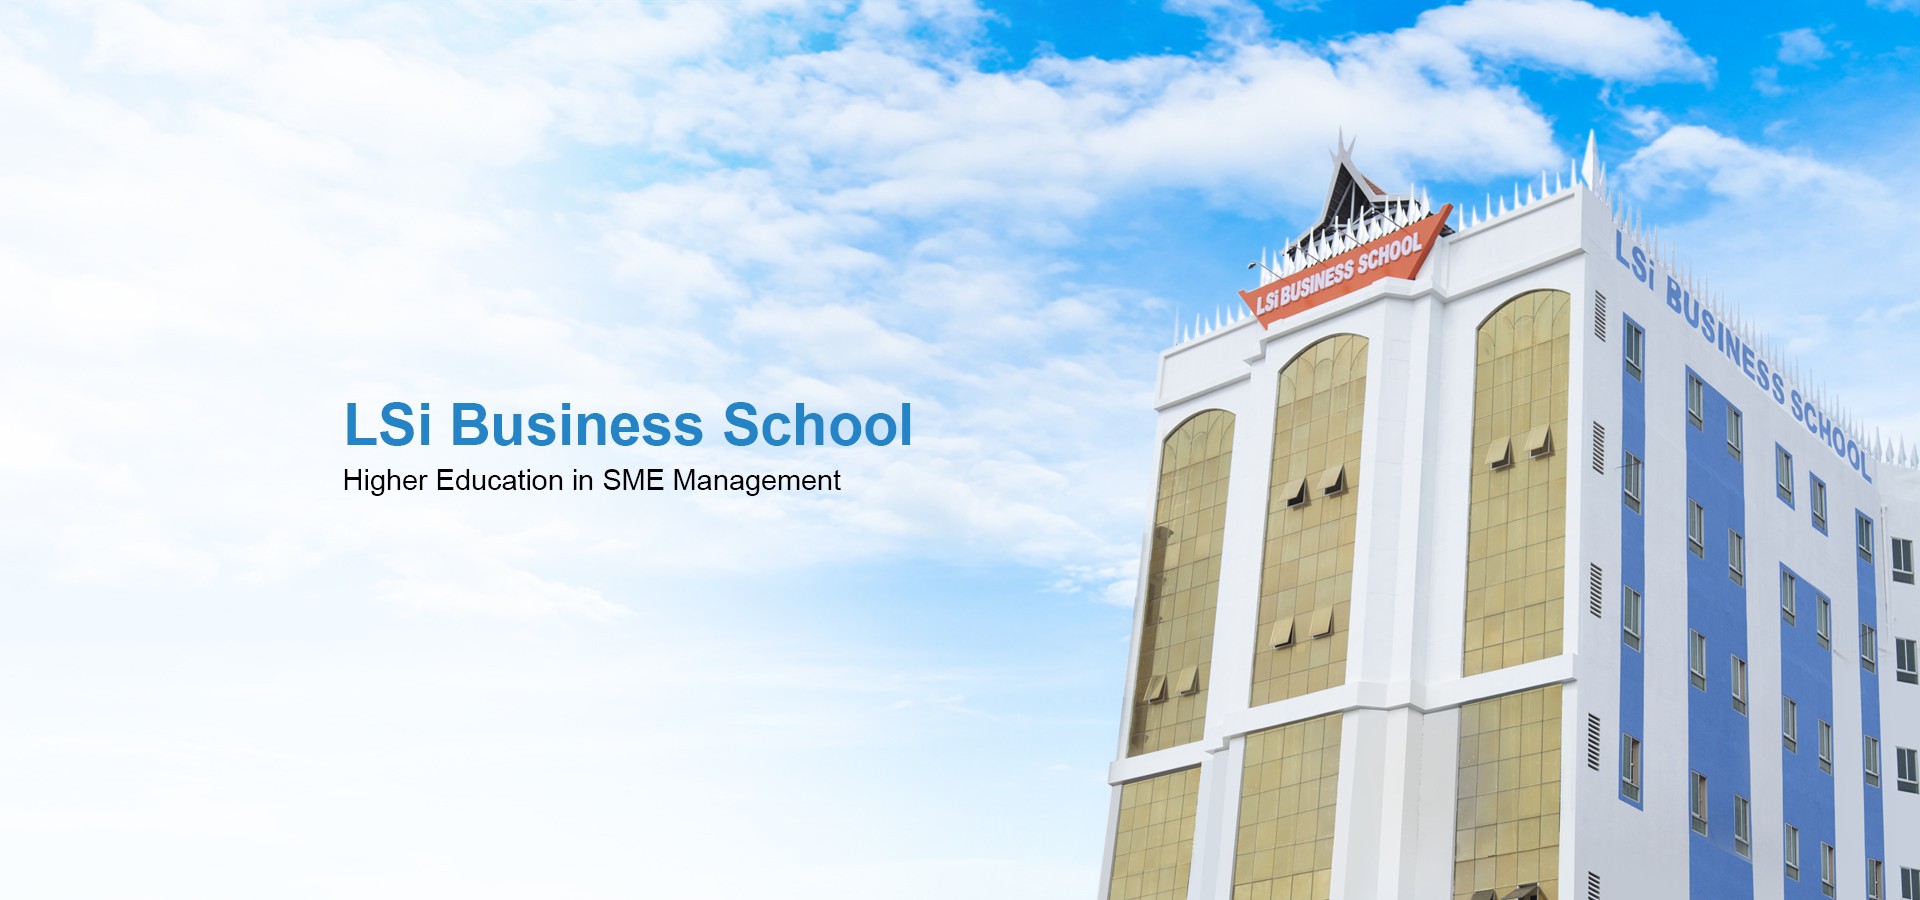 Welcome to LSi Business School